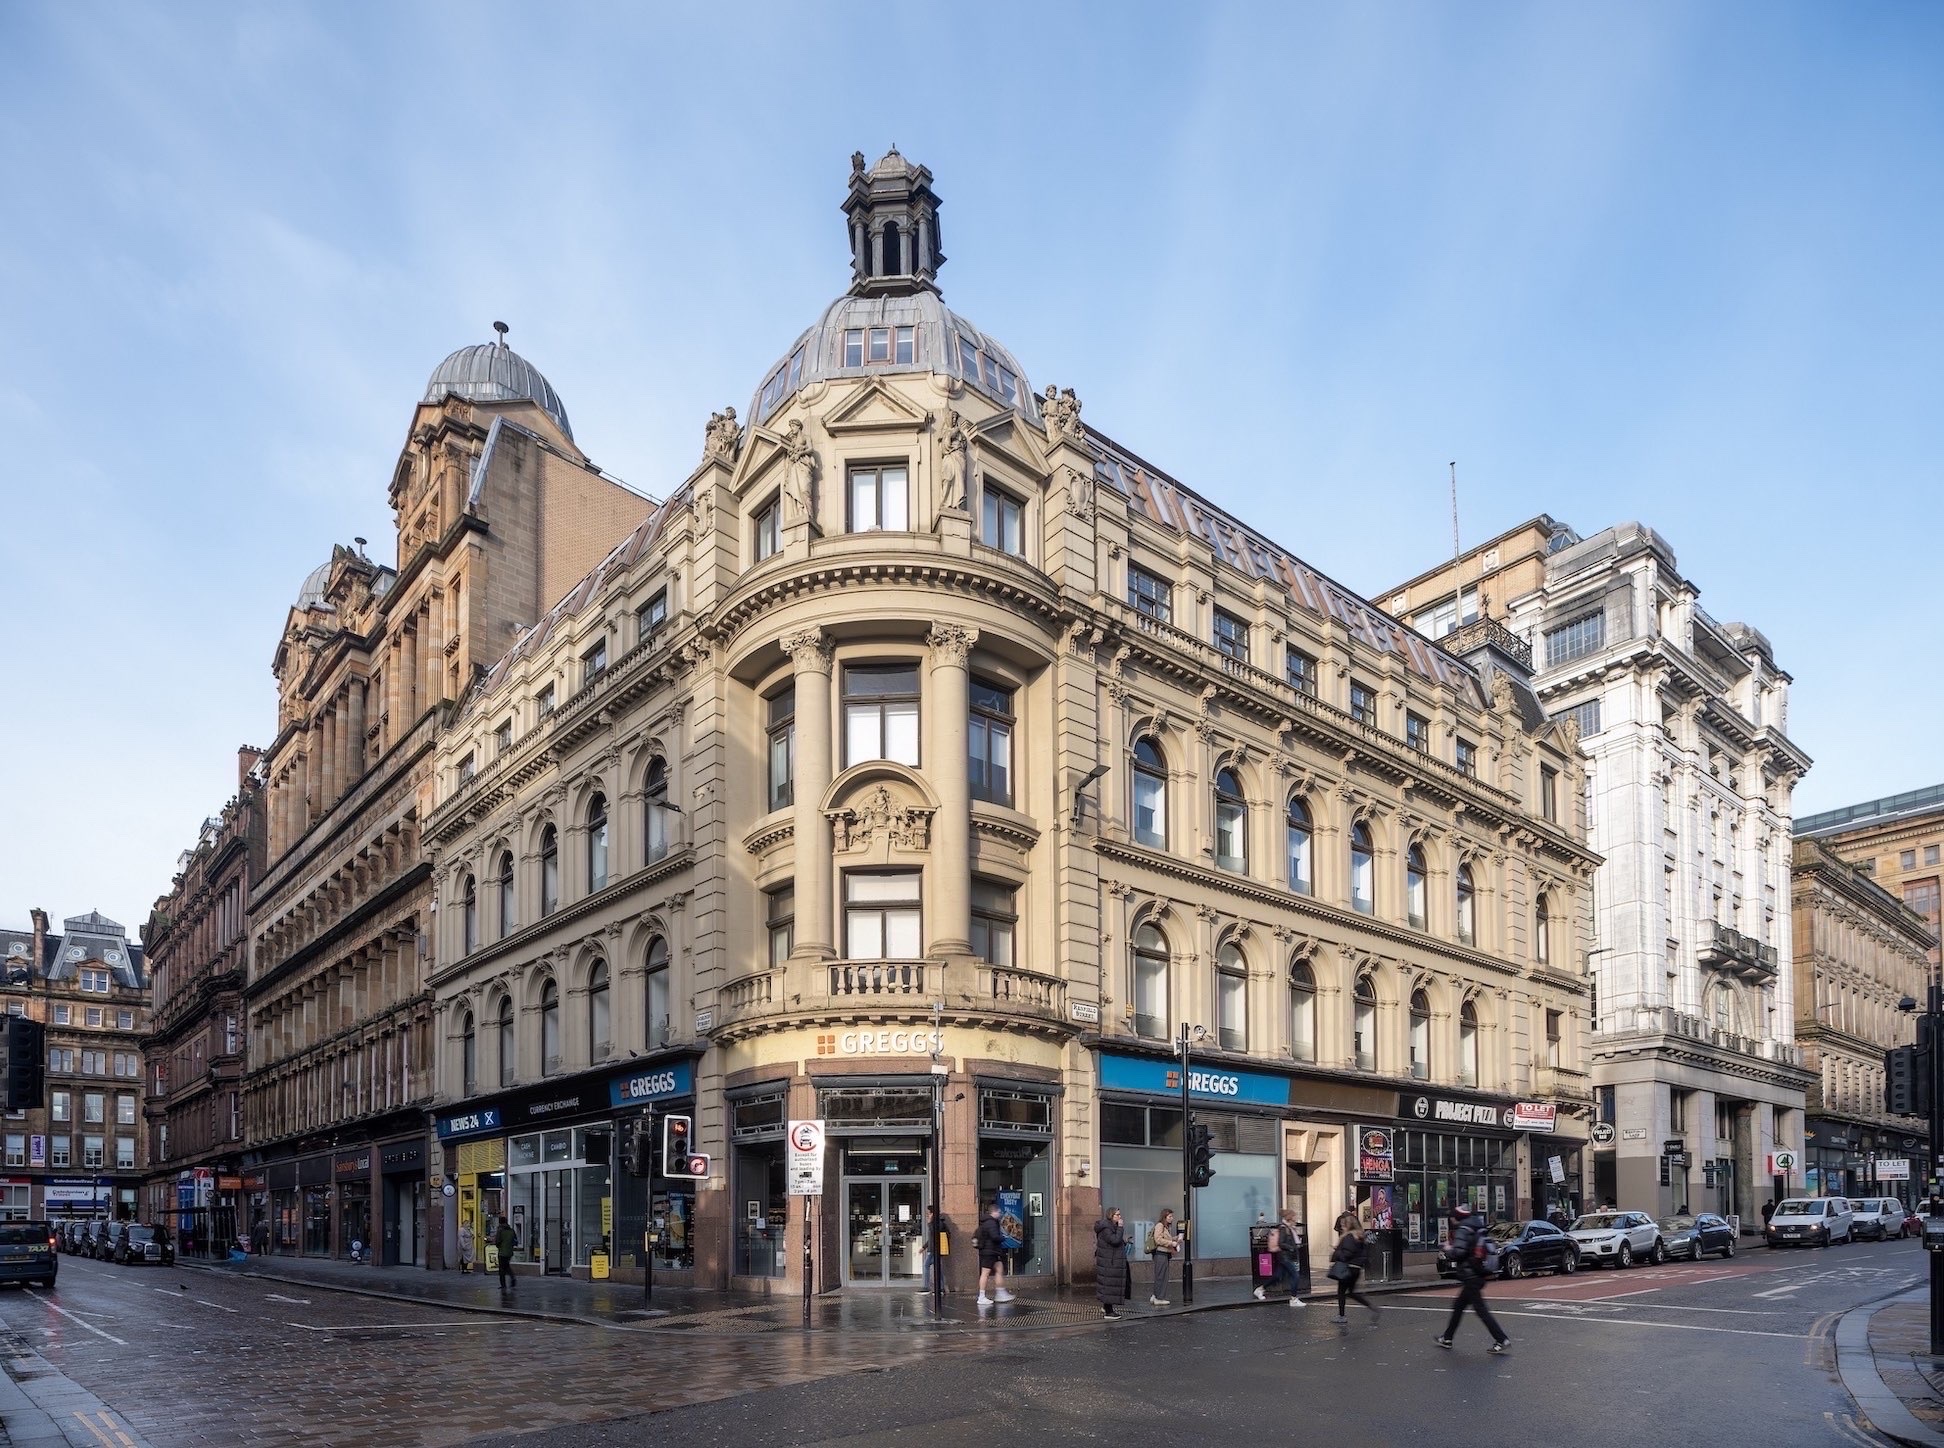 Private London investor acquires Glasgow's iconic Forsyth Building for £9.7m